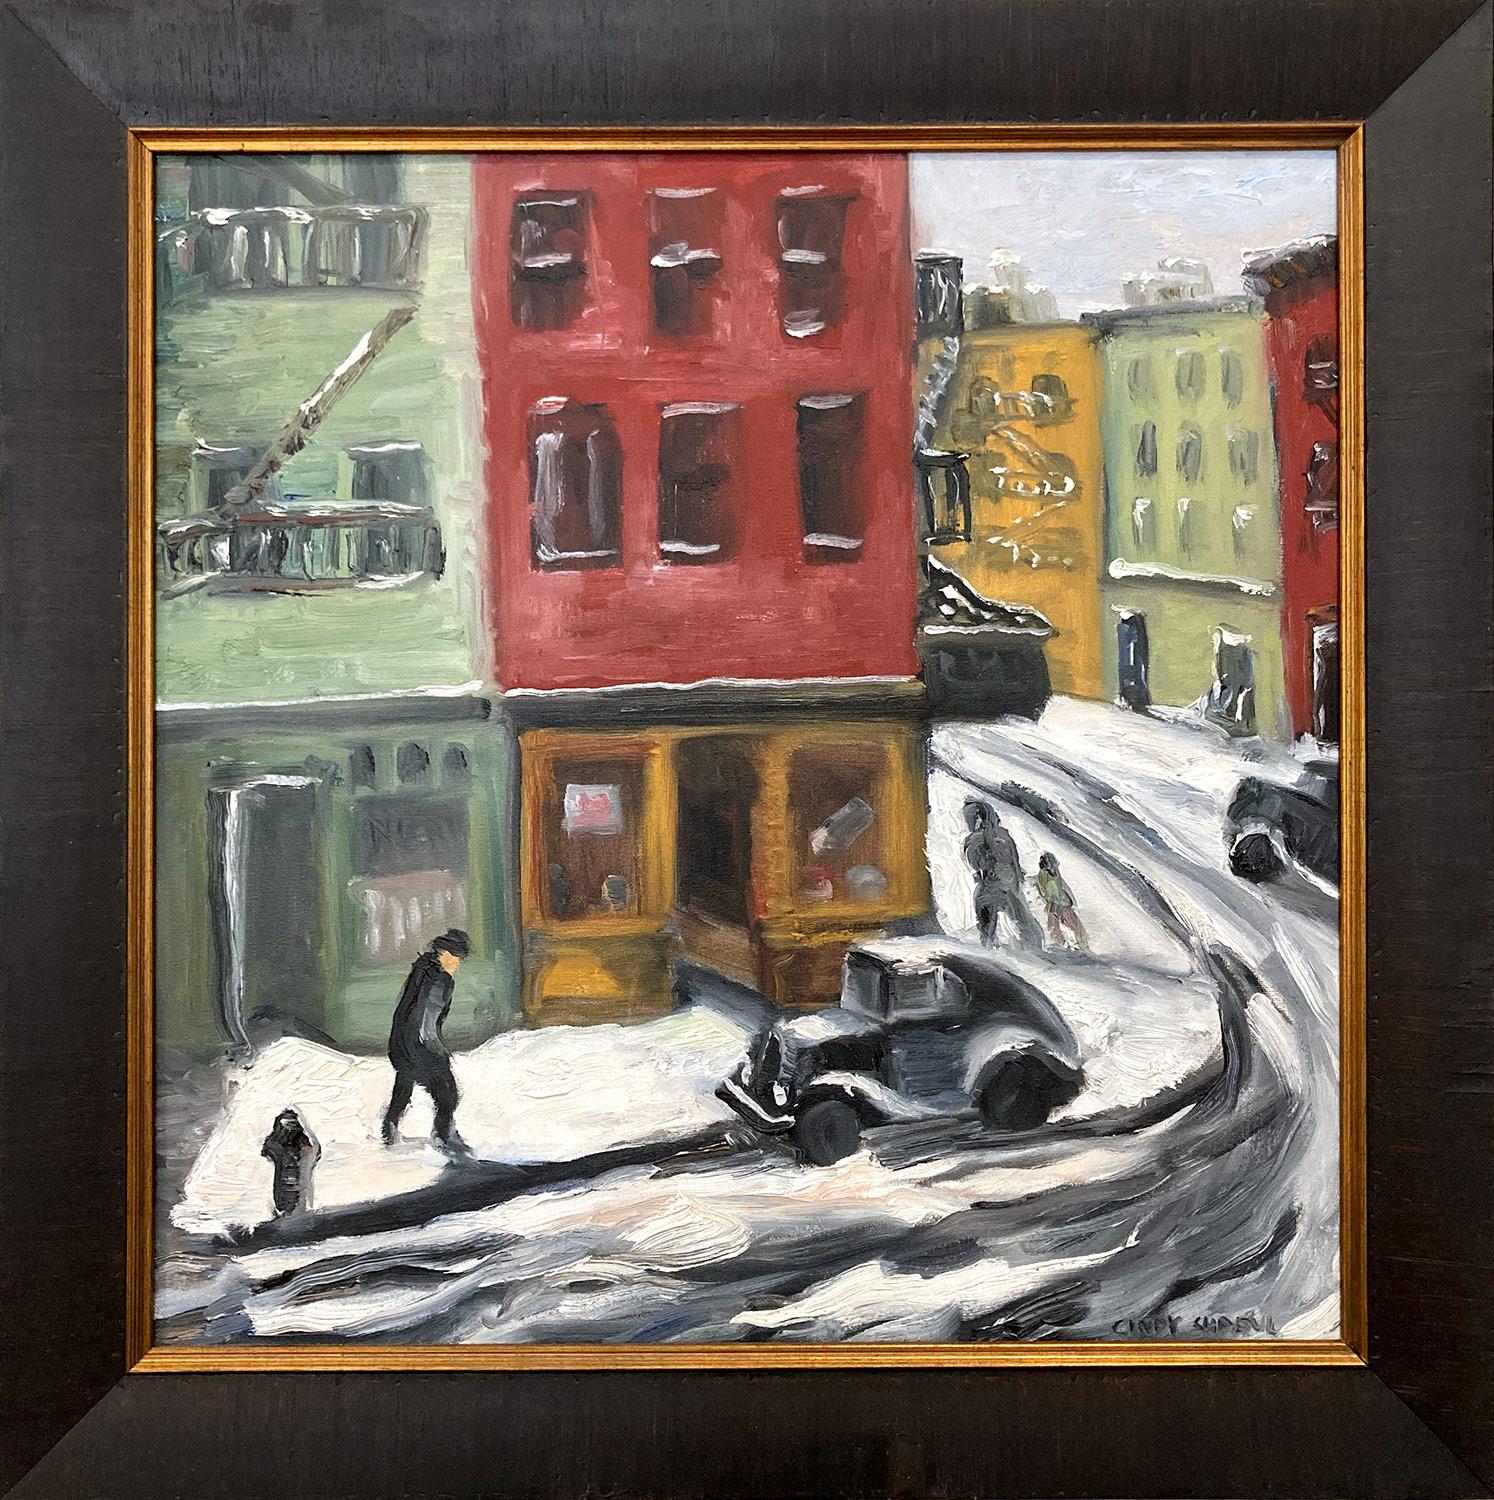 Cindy Shaoul Figurative Painting - "Tavern Snow, West Village" Impressionistic Oil Painting in New York City 1920s